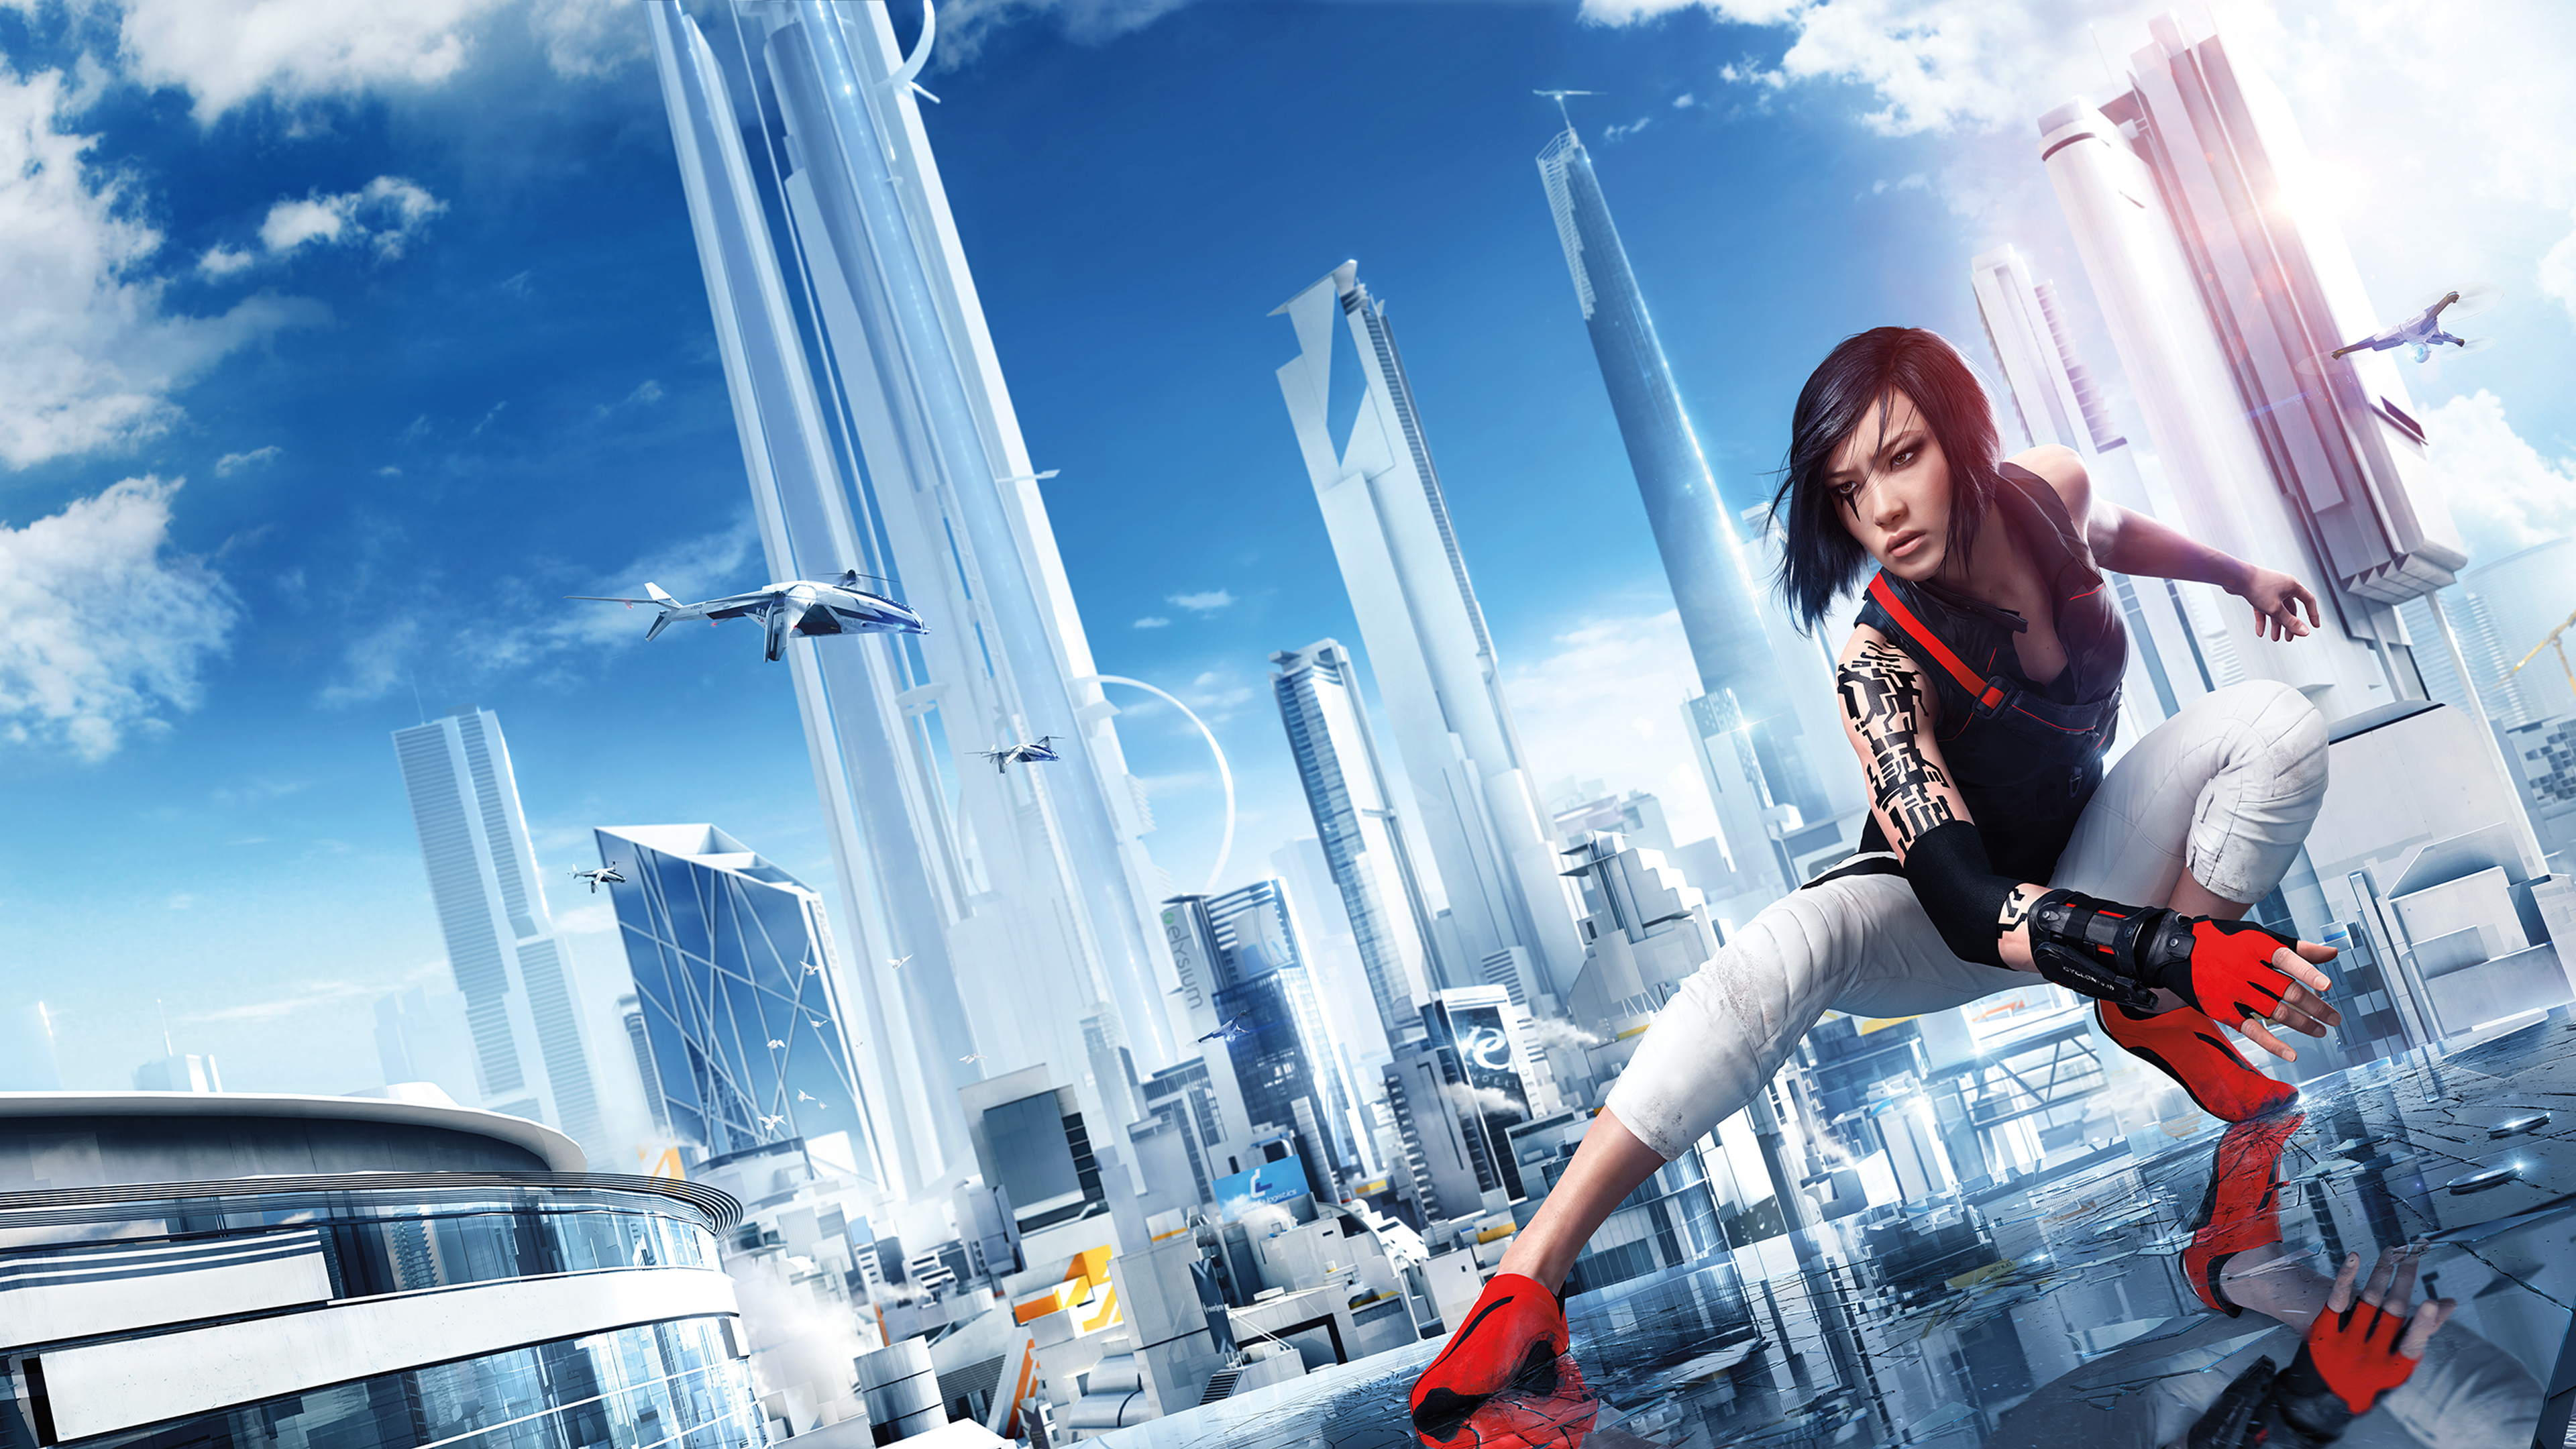 Mirrors Edge Video Game Art Sky Clouds Video Games Looking Away Reflection Building City Aircraft Ta 3840x2160